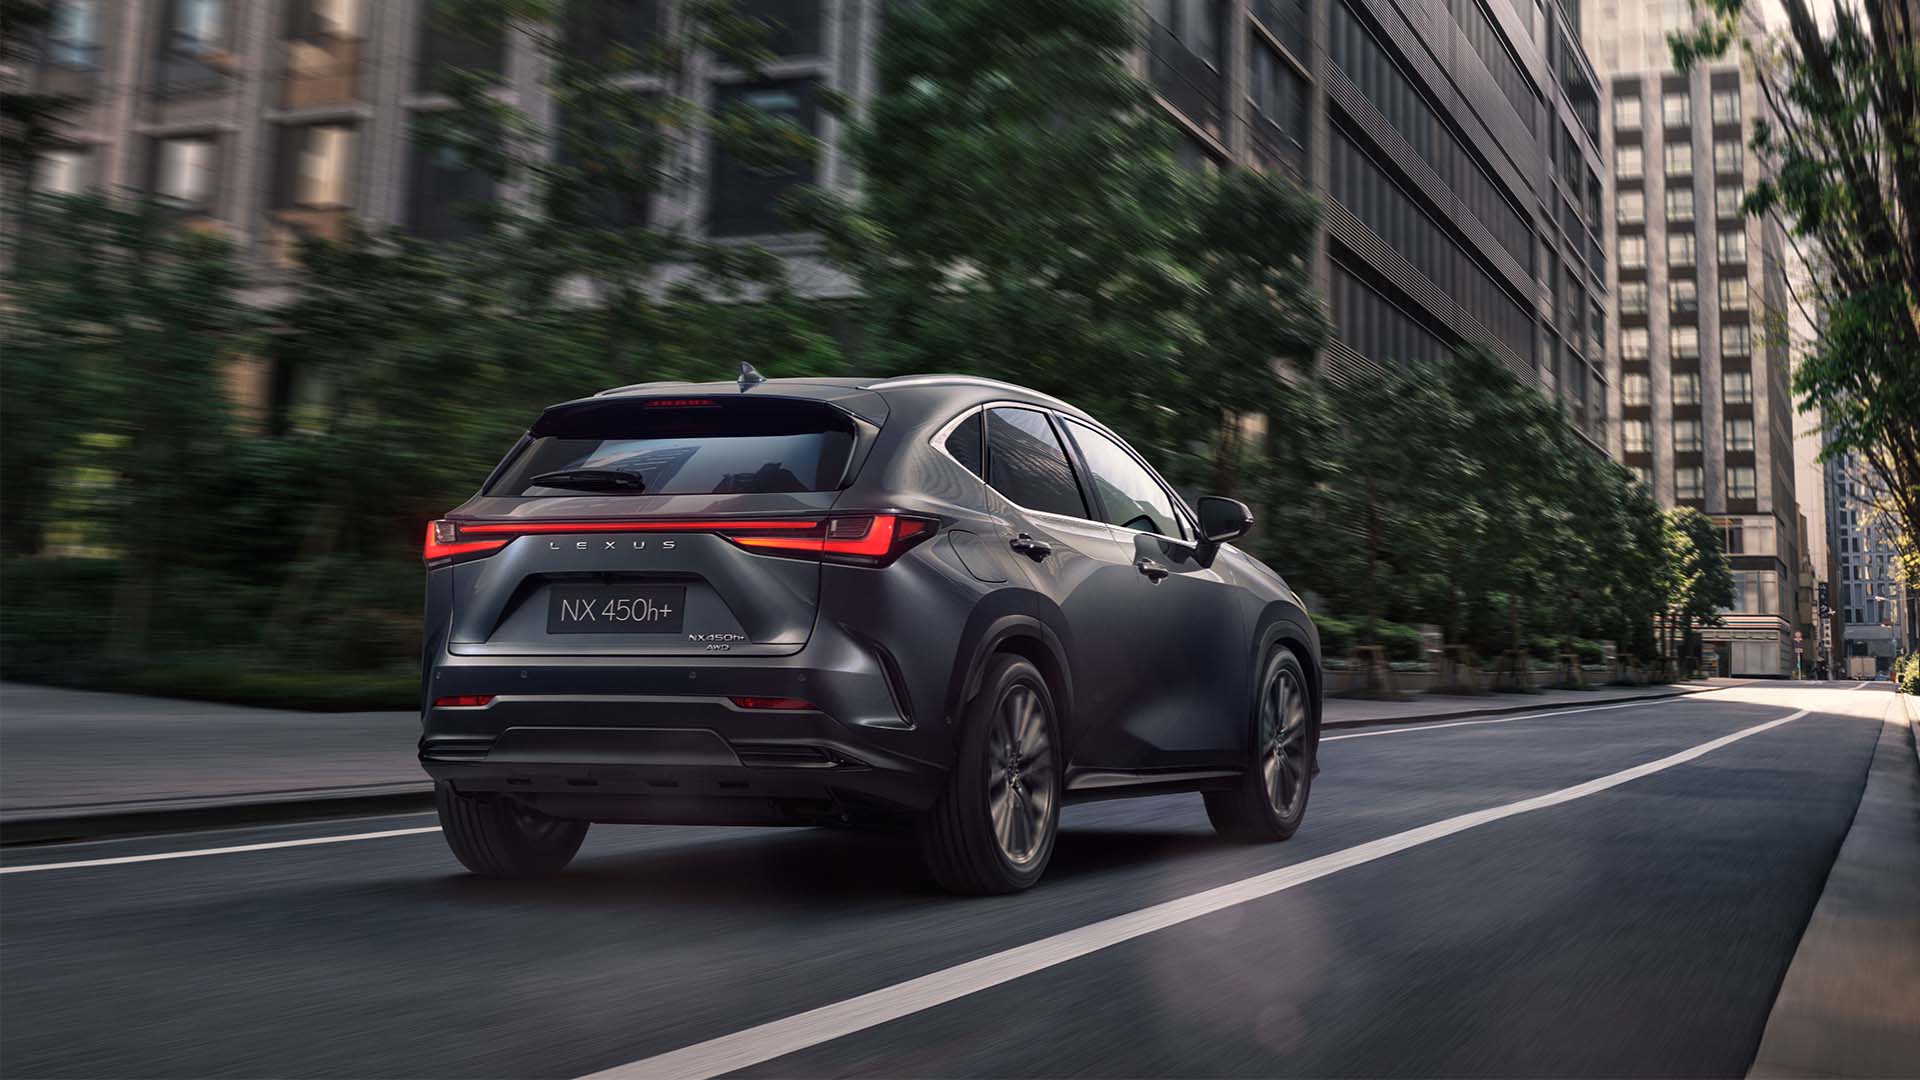 Lexus NX driving in a city location 